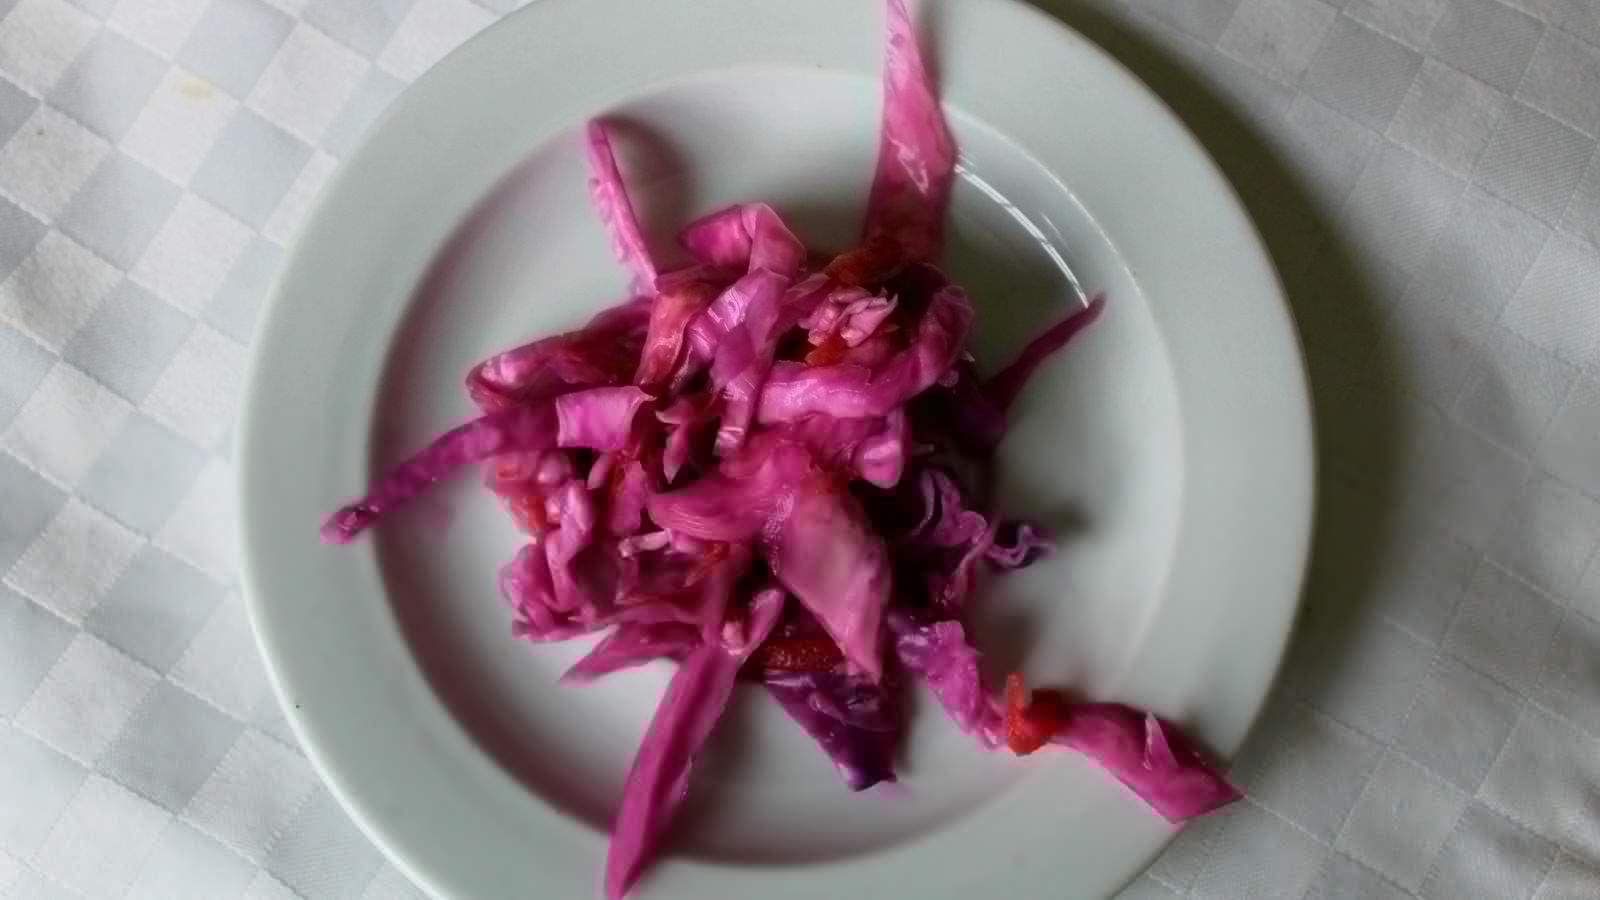 A top view image of quick-pickled russian sauerkraut in a white plate.